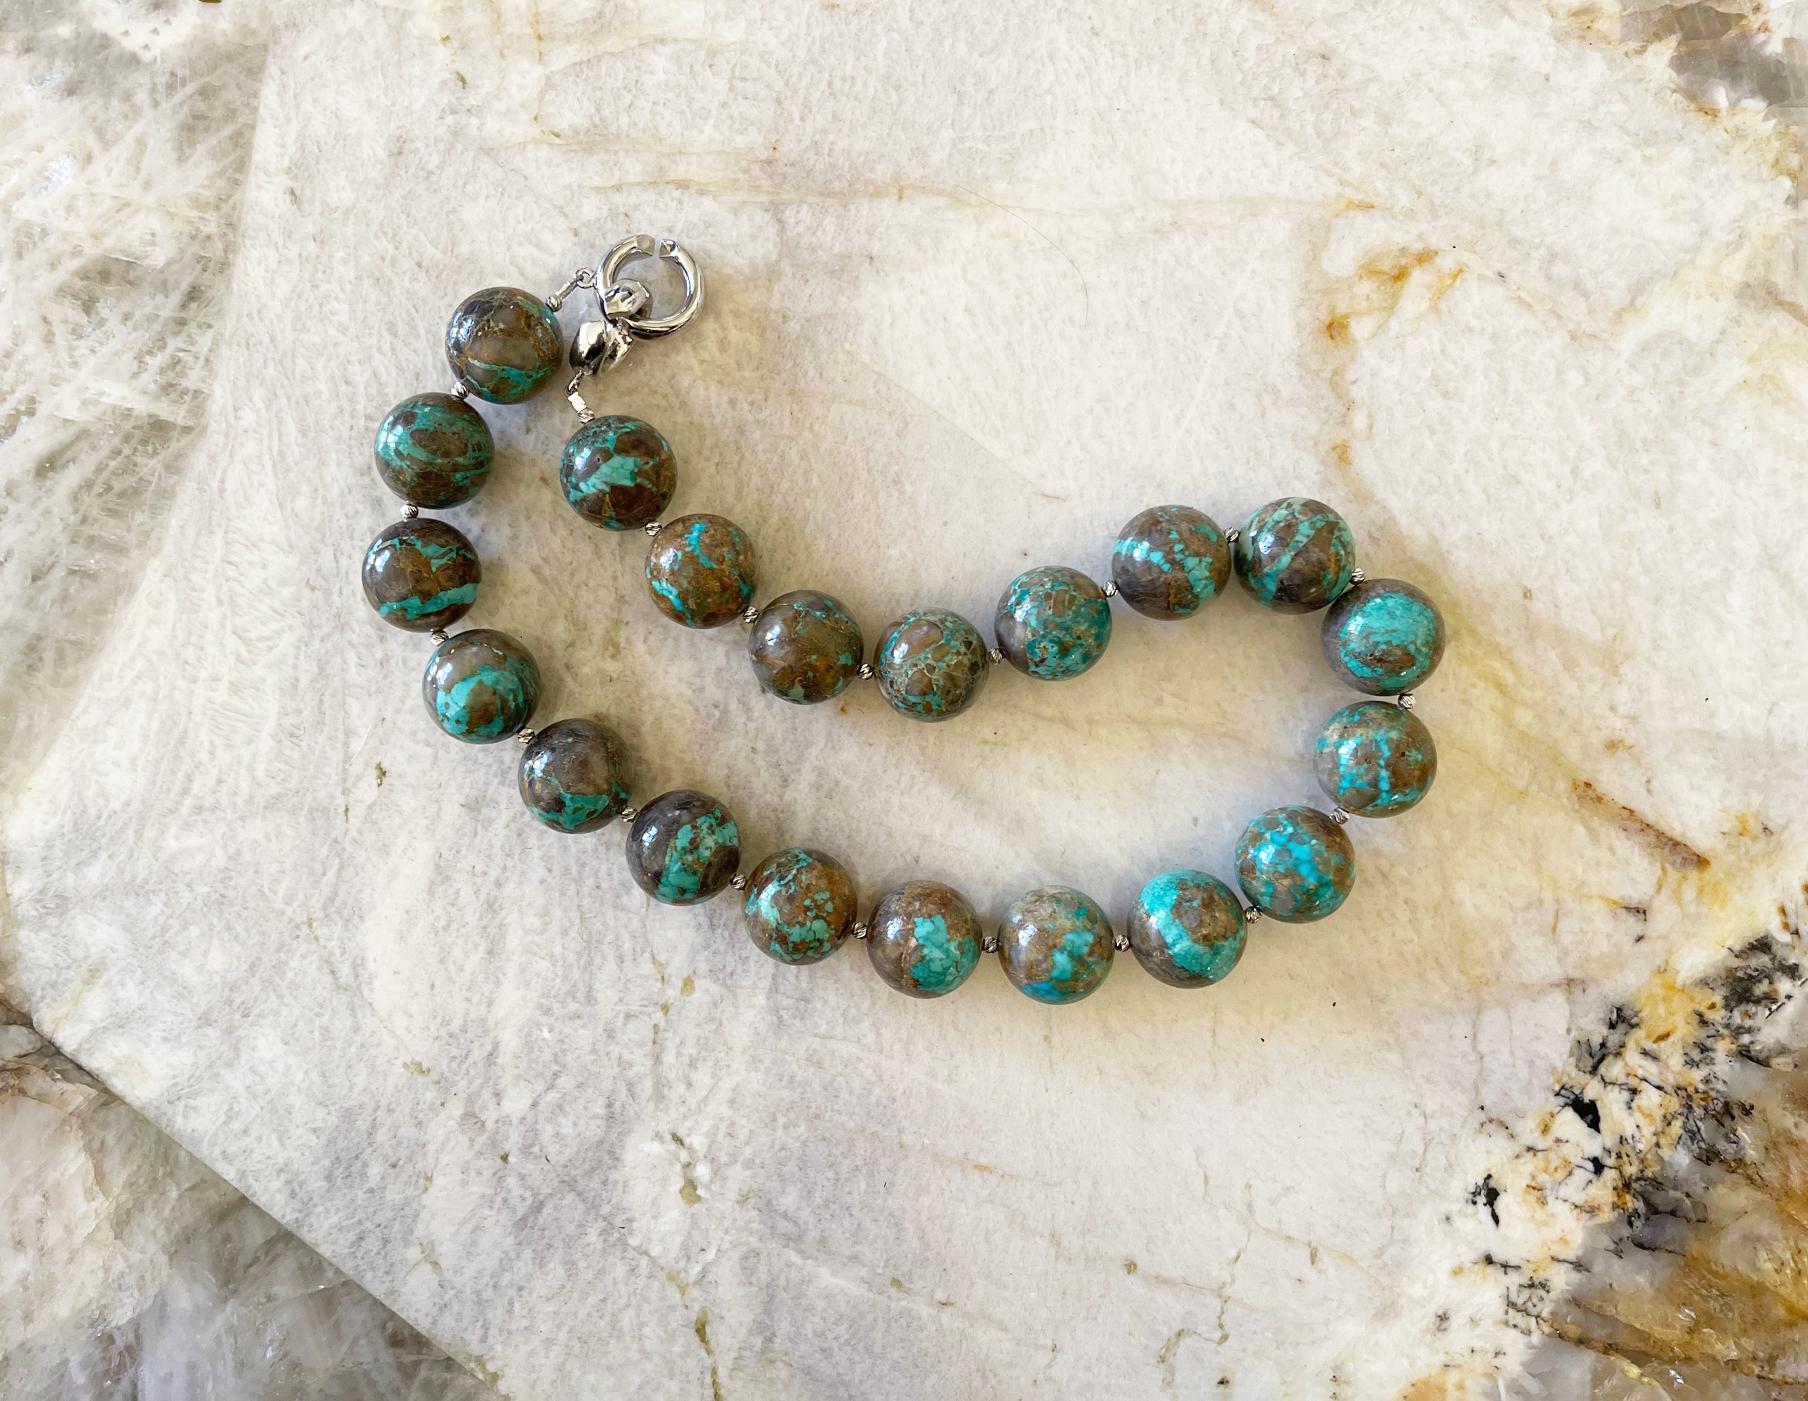 Gorgeous necklace made with very rare Nevada Carico Lake 20mm round turquoise beads, tiny sterling silver accent beads, and finished with an elegant interlocking clasp. This necklace measures 19 inches (48.3 cm) long including the clasp. The